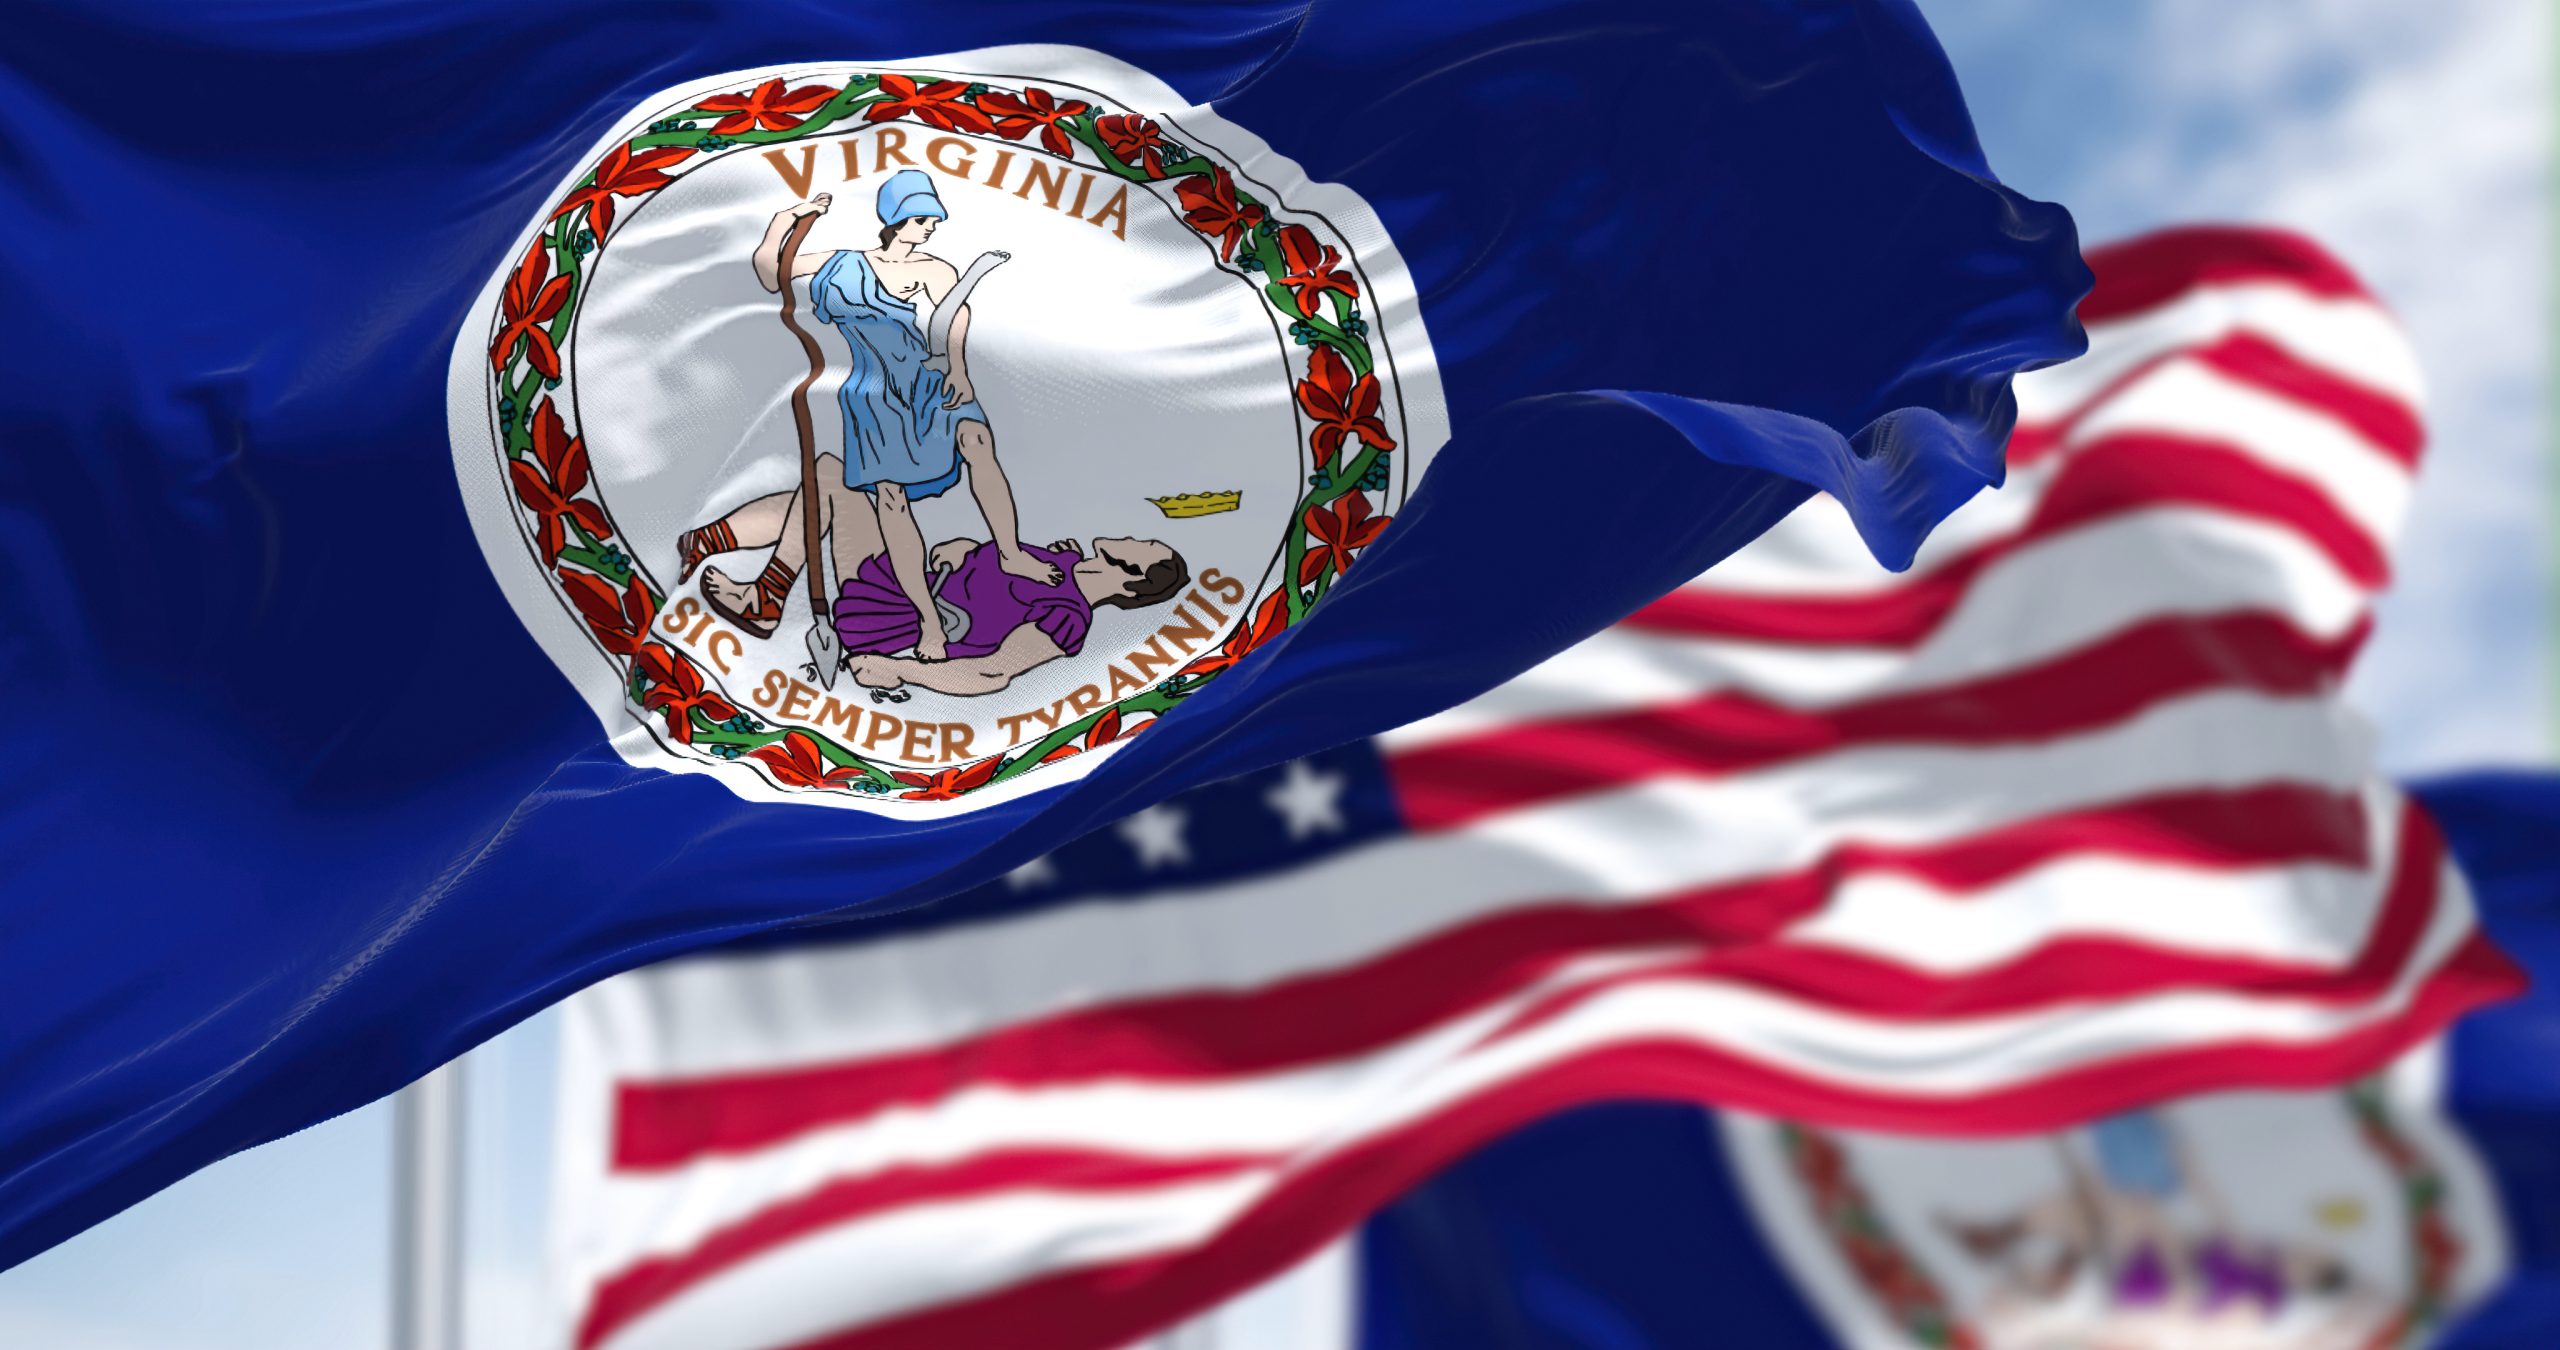 Election Integrity: Legislation in the Virginia General Assembly and U.S. Congress